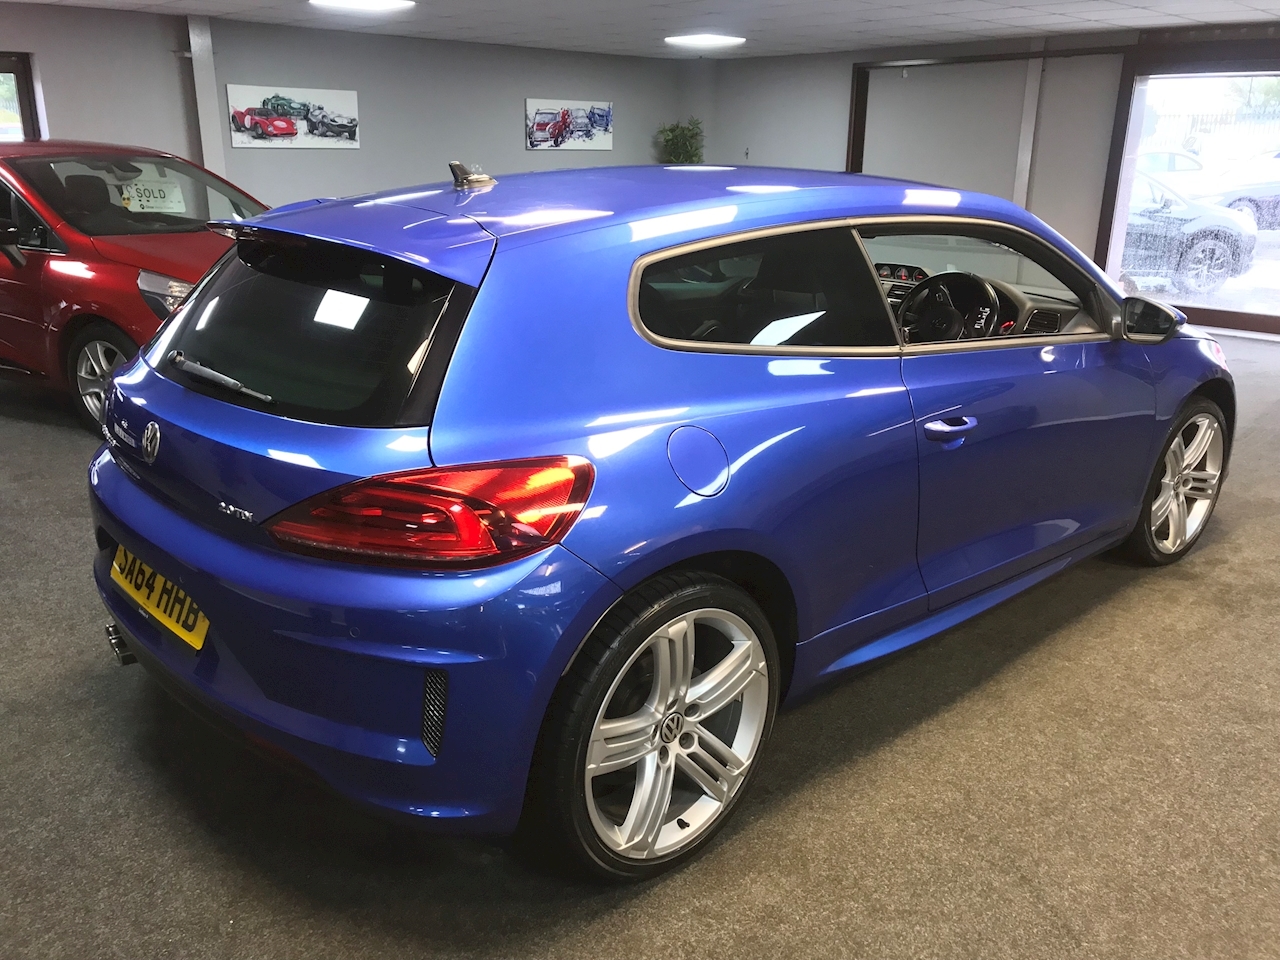 Scirocco R Line Tdi Bluemotion Technology Coupe 2.0 Manual Diesel